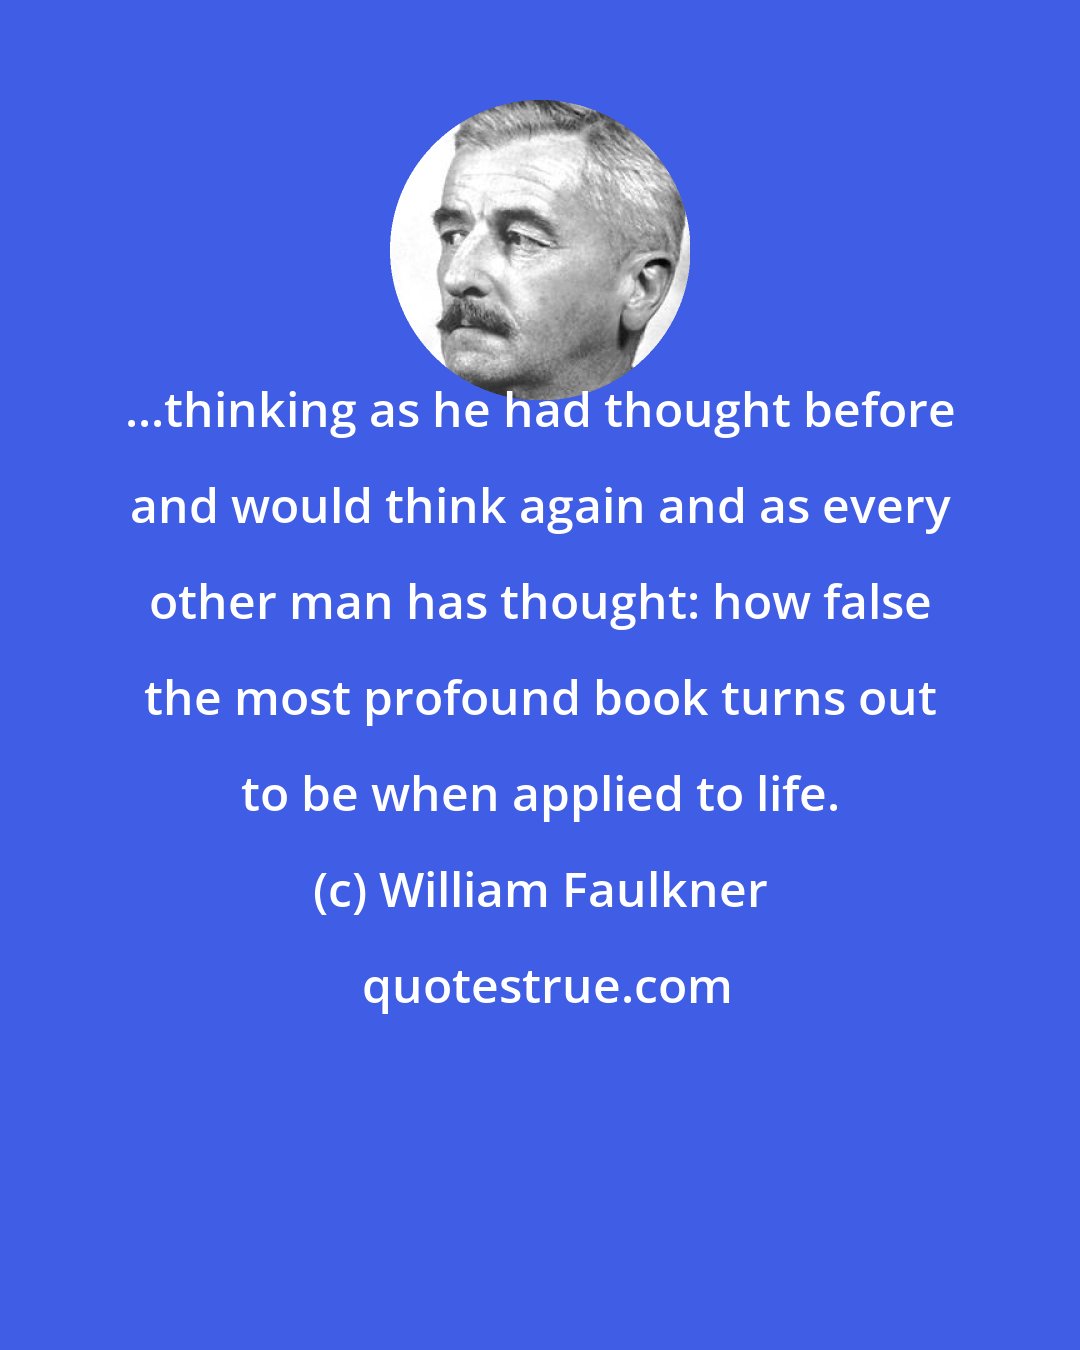 William Faulkner: ...thinking as he had thought before and would think again and as every other man has thought: how false the most profound book turns out to be when applied to life.